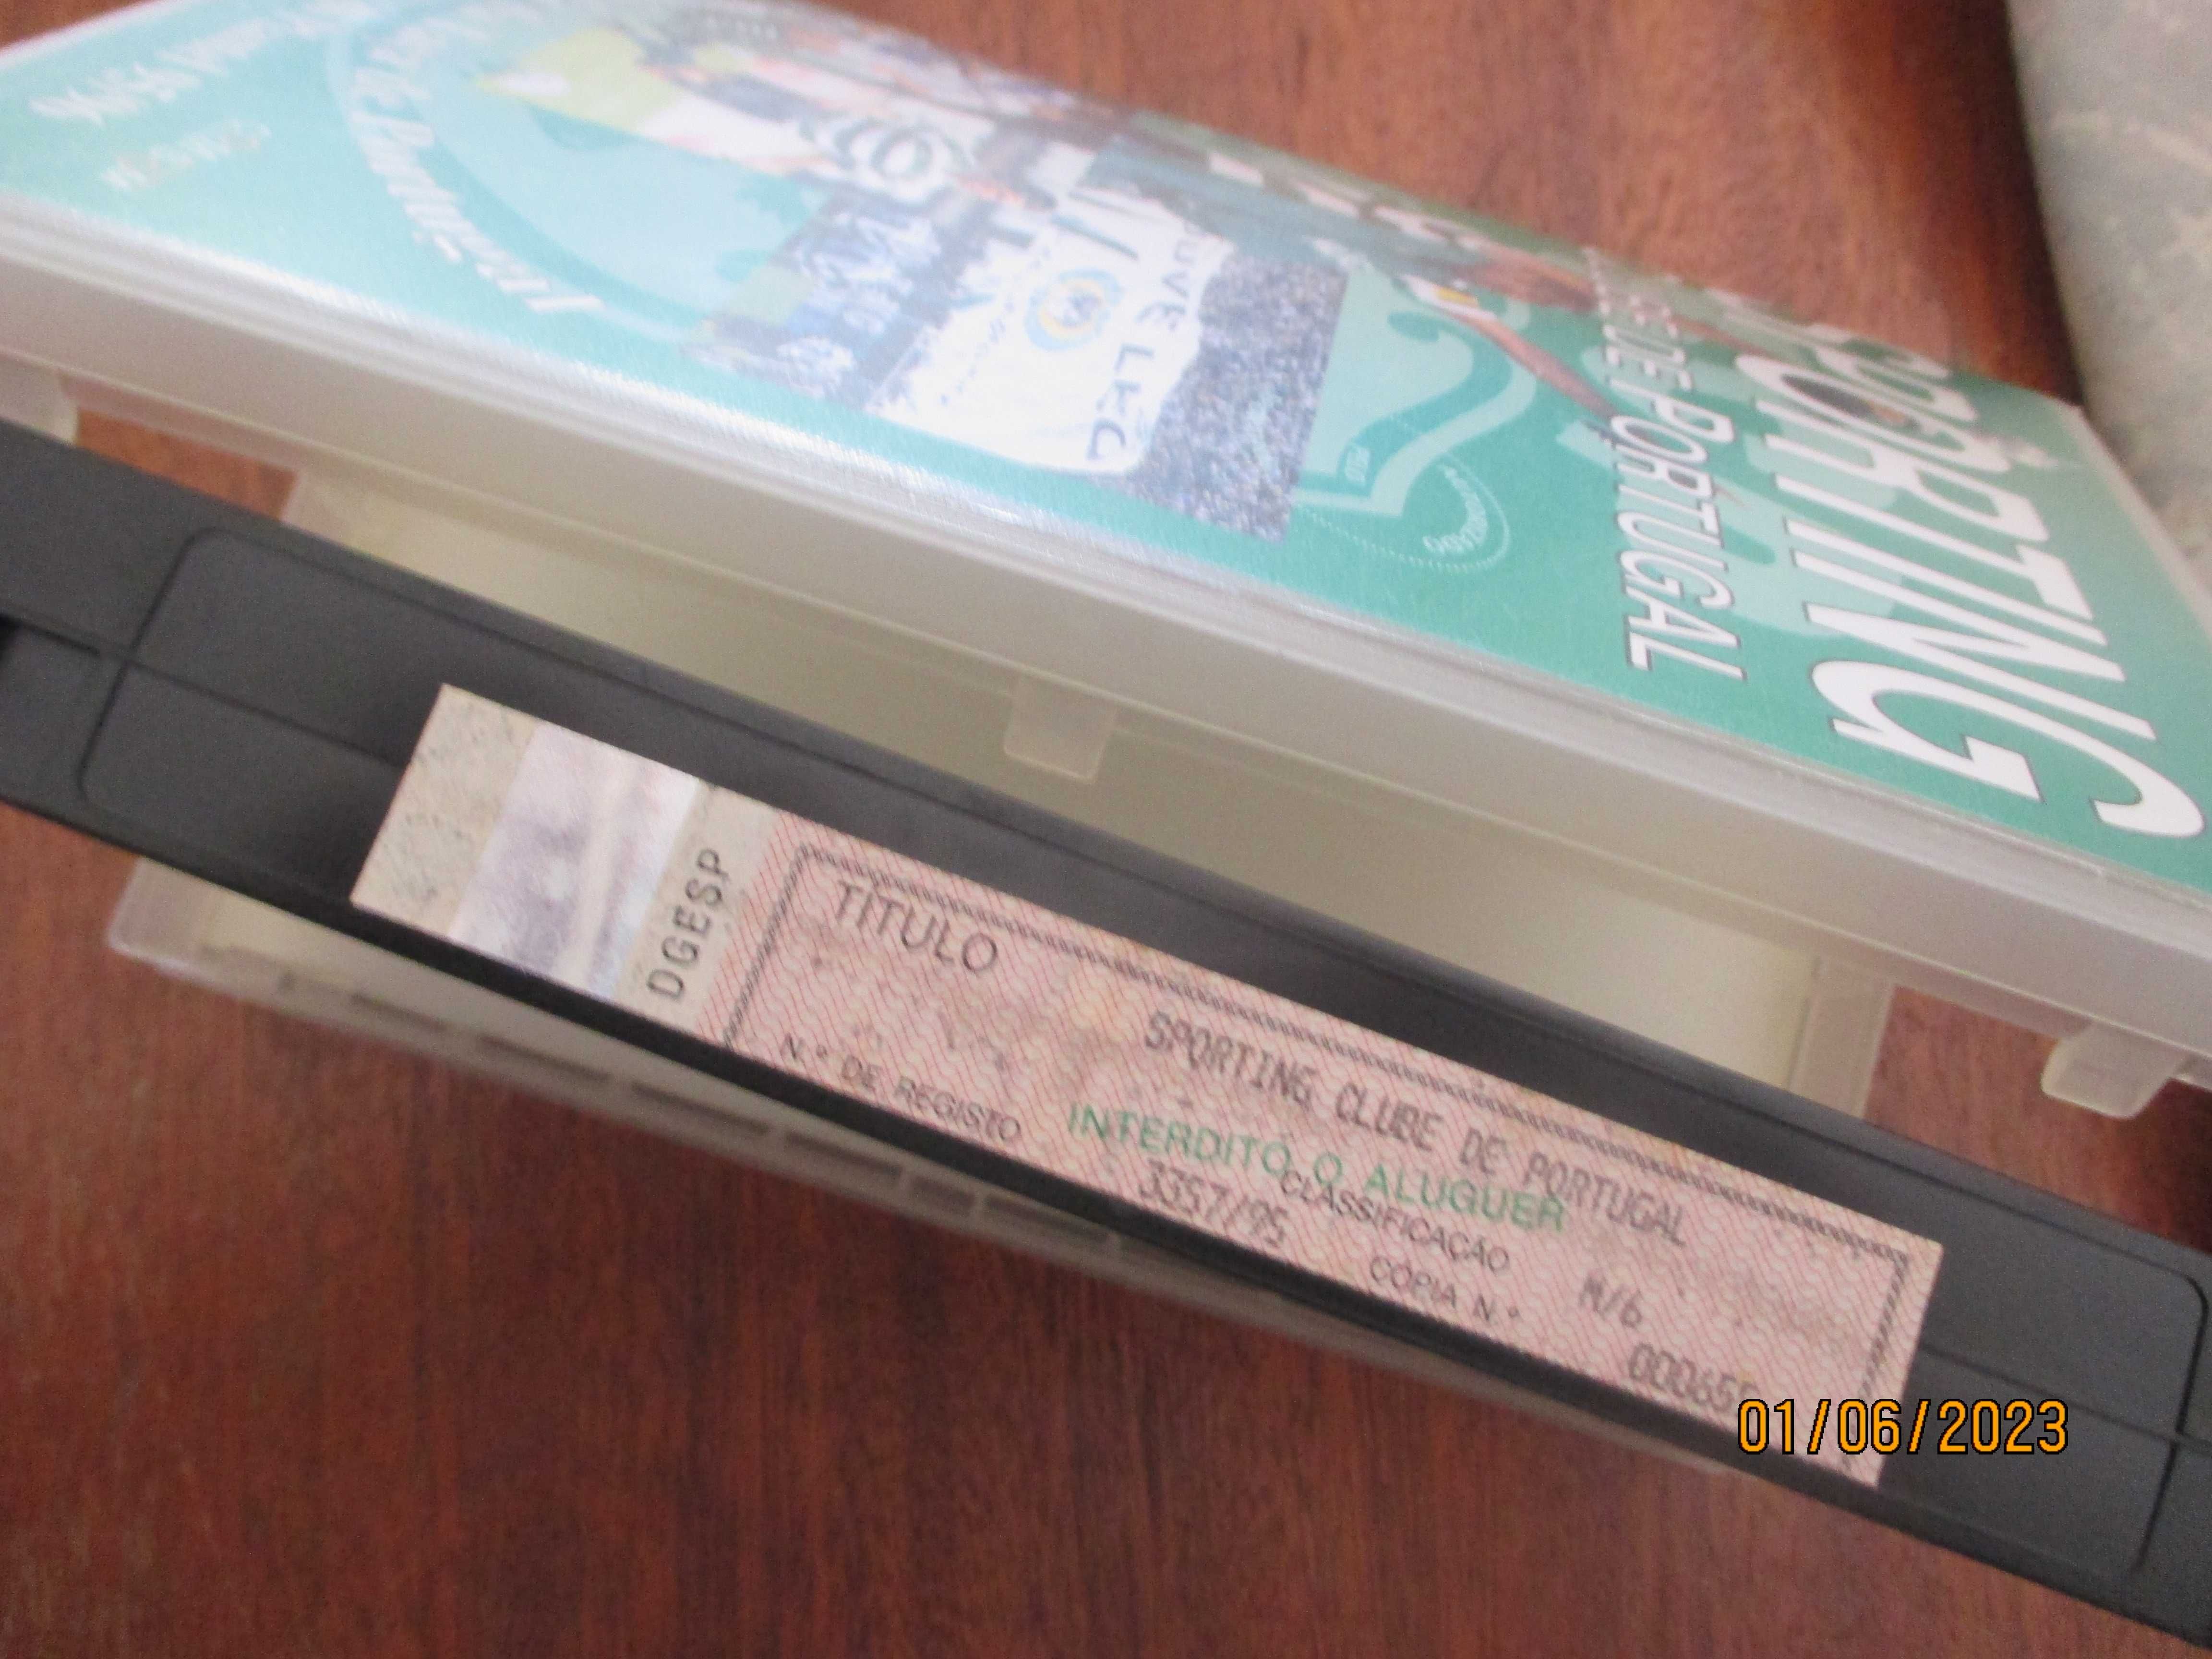 2 vhs do Sporting C.P.